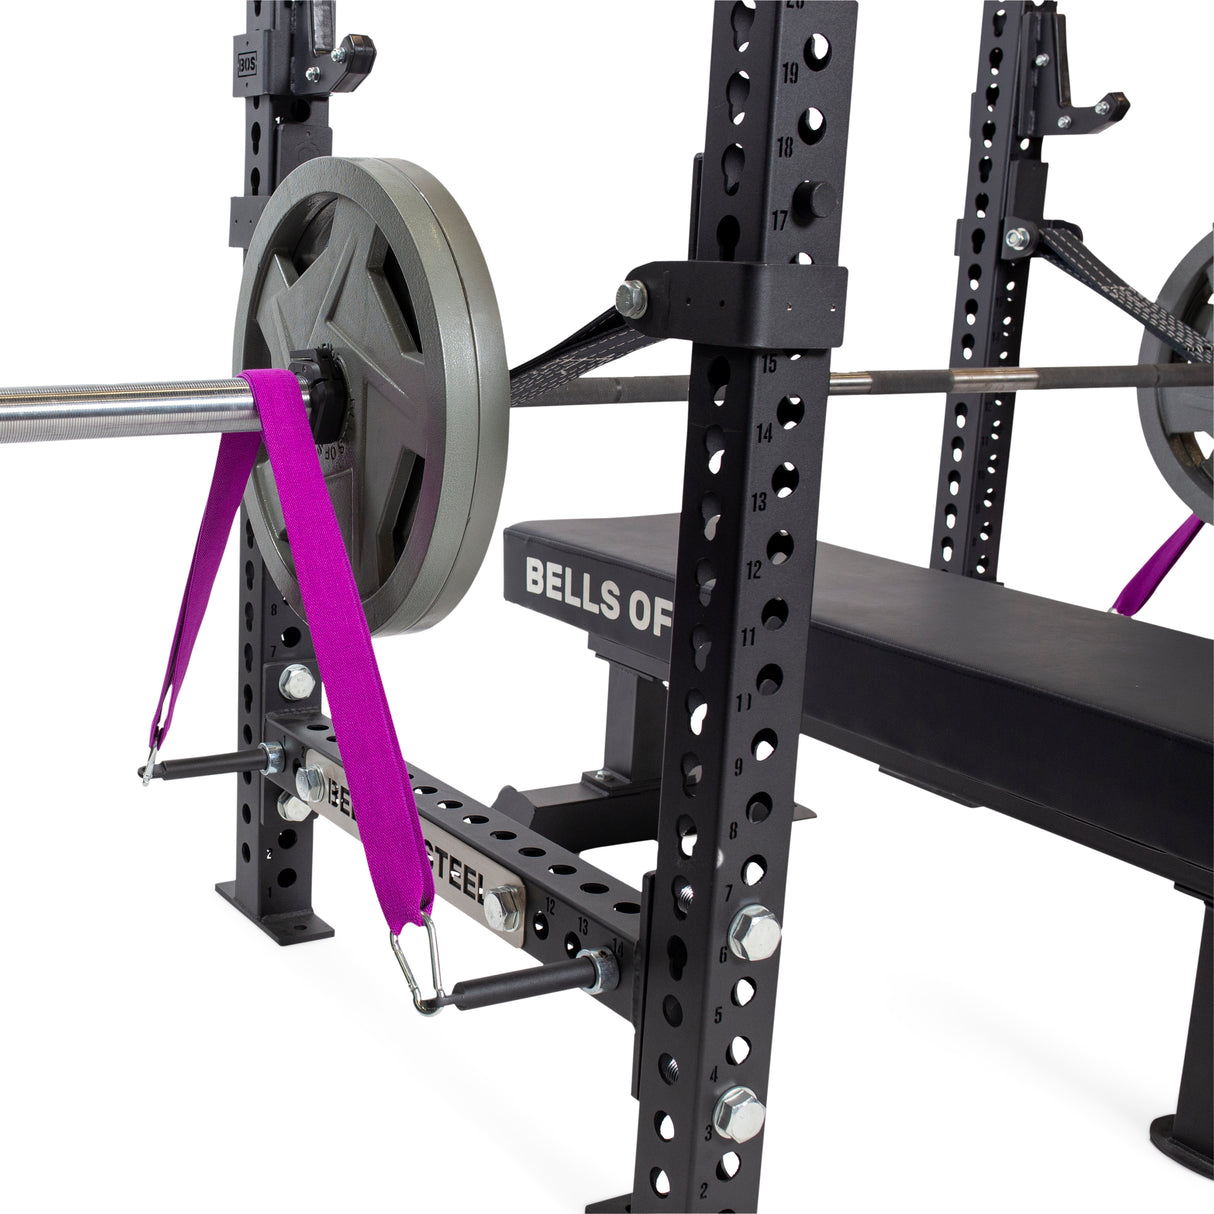 Power rack setup with barbell, weight plates and Band Pegs with Carabiners